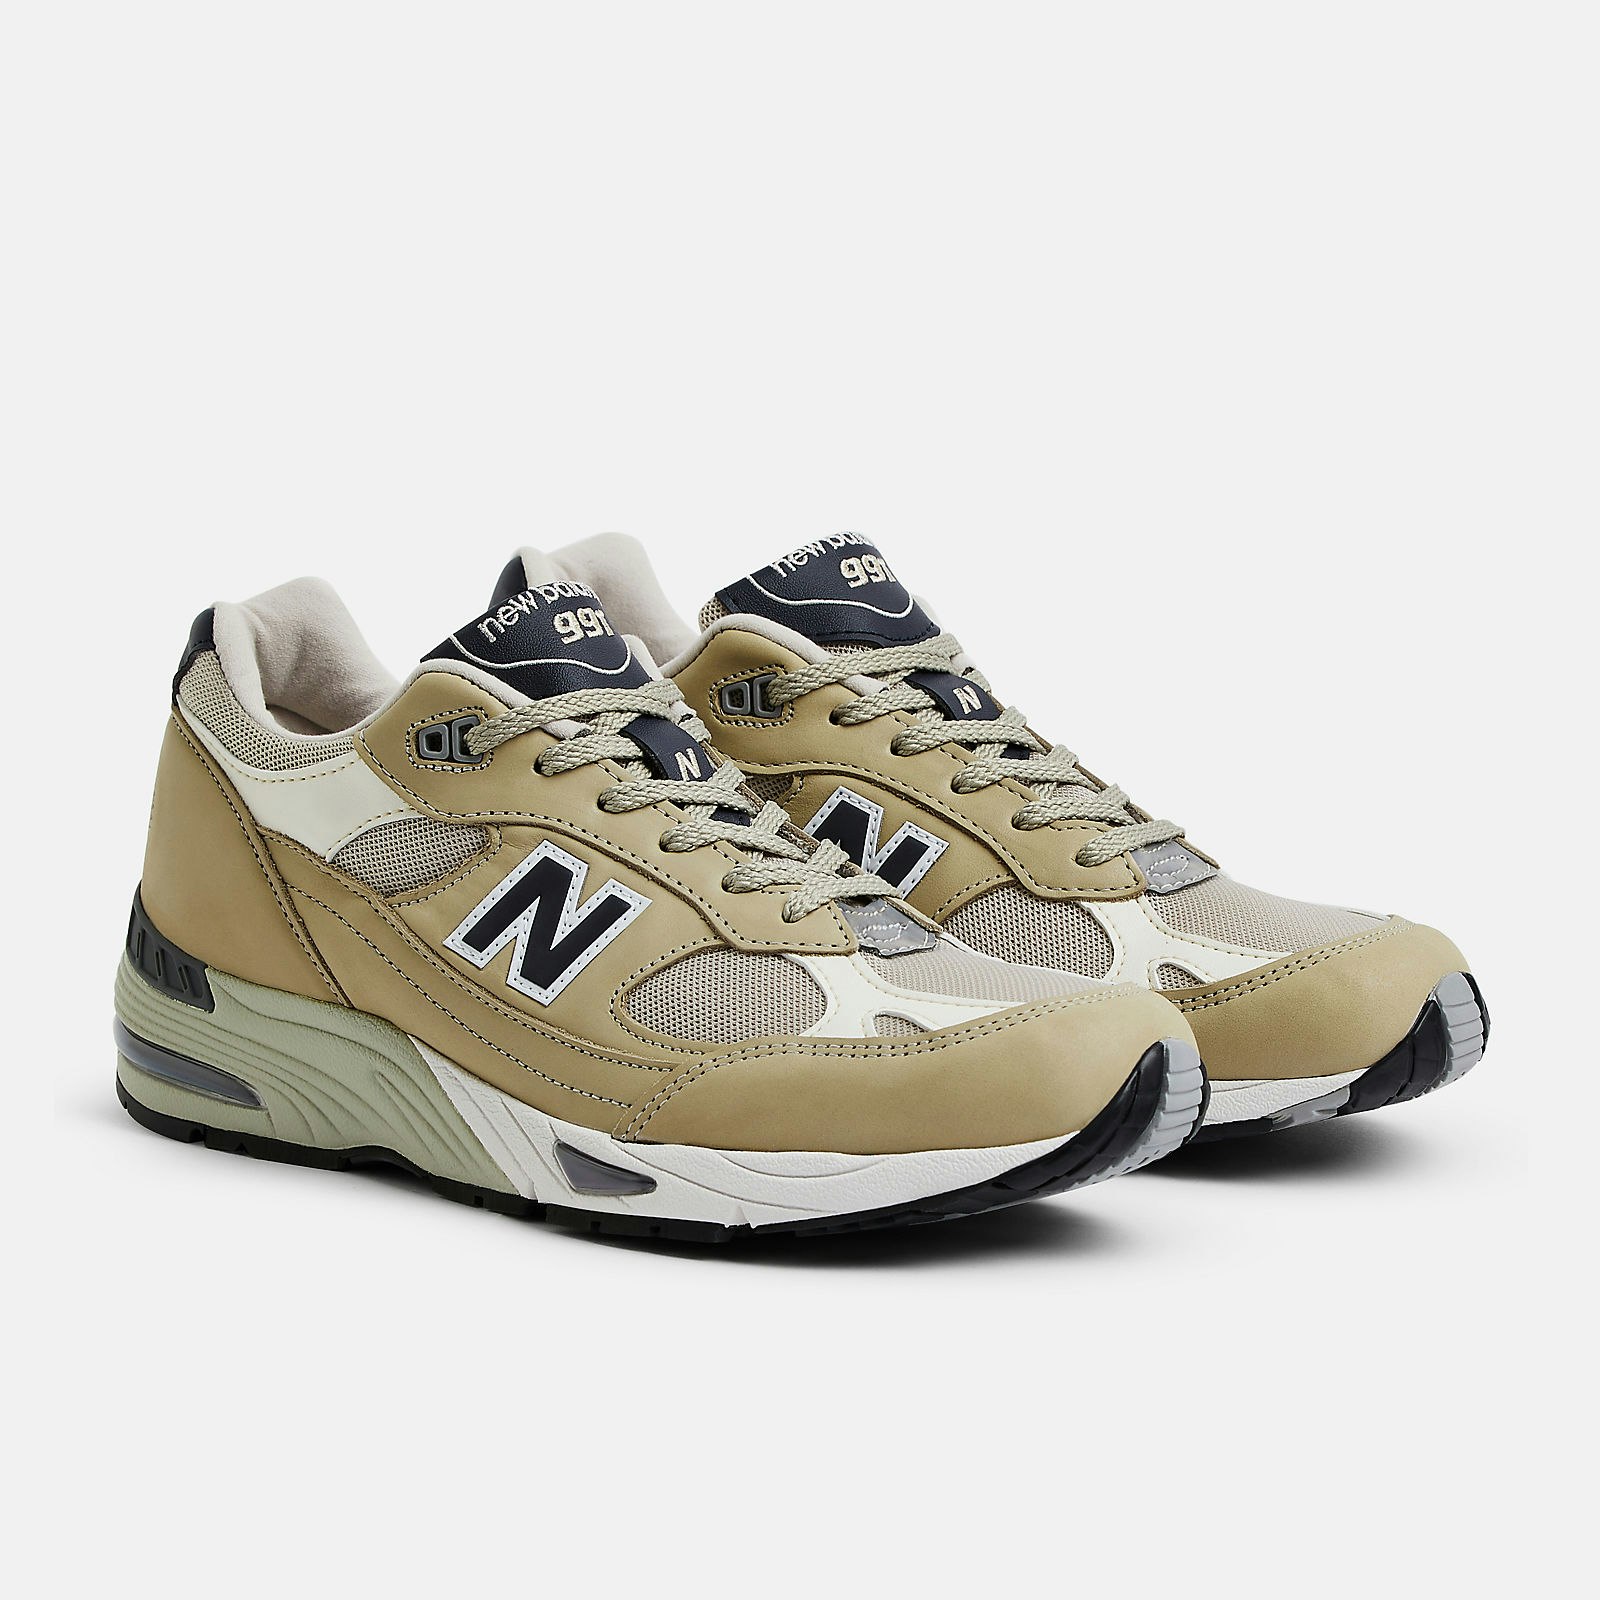 New Balance 991 "Made in UK" (Brown Rice)